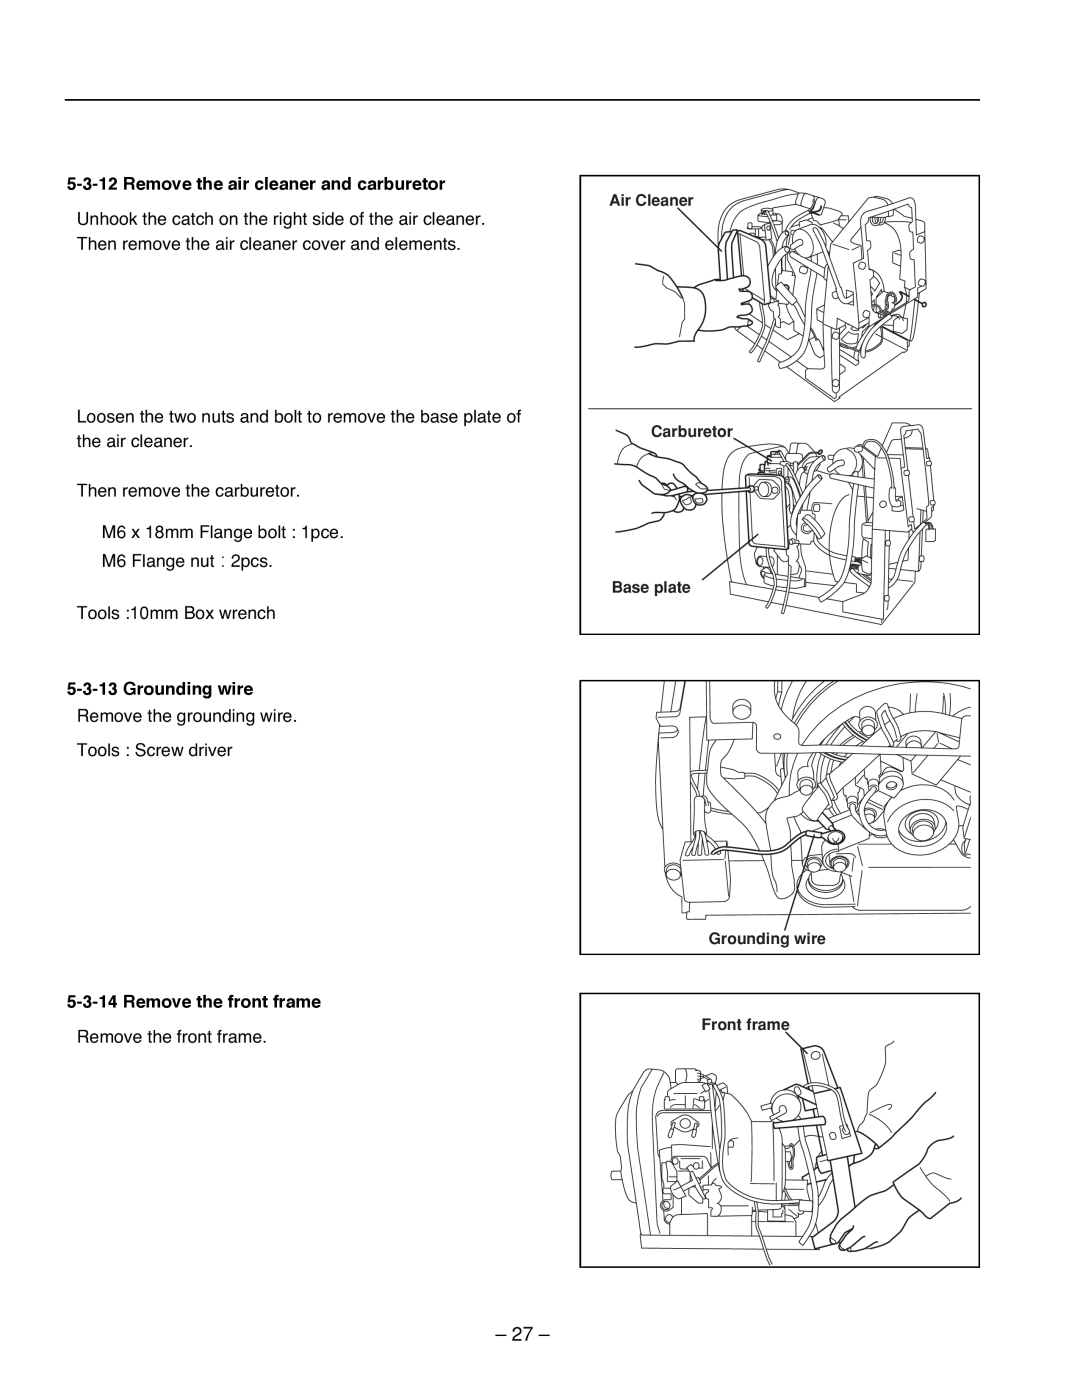 Subaru R1100 service manual Remove the air cleaner and carburetor, Grounding wire, Remove the front frame 